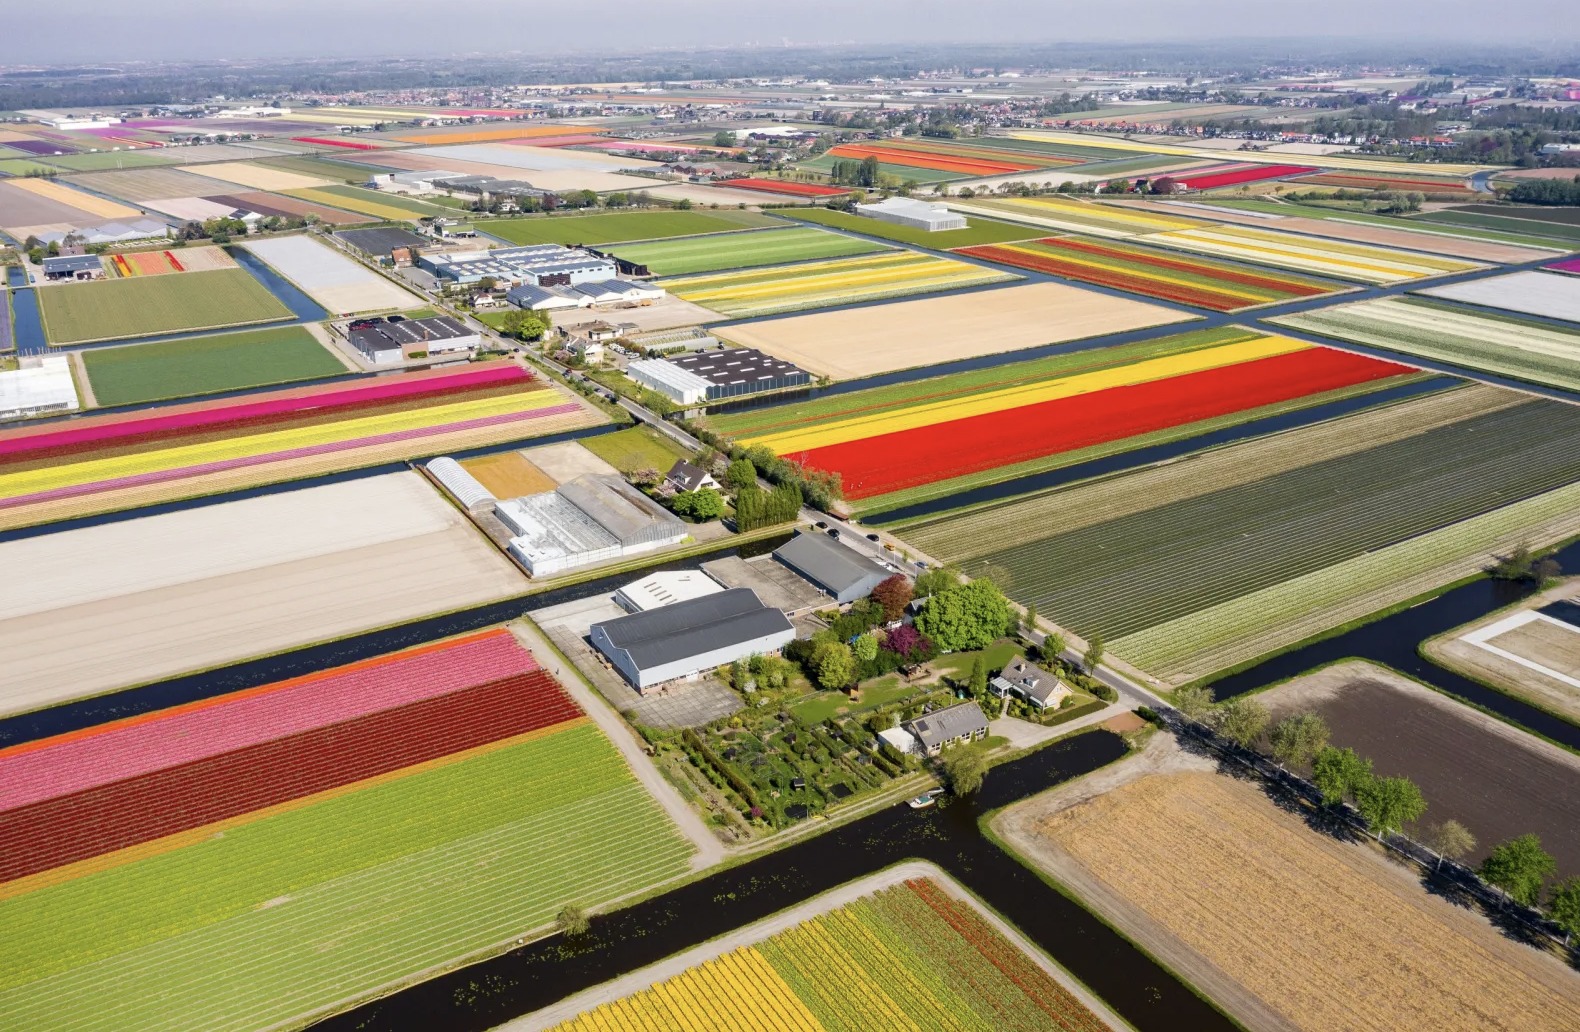 With a Helicopter Flight near Keukenhof Gardens you can truly enjoy the spectacular view over the tulip fields in Holland! 🚁🌷 The Helicopter Tour is exclusively available during only 7 flying days in April 2023.

Book your helicopter tickets here:
> https://tulipfestivalamsterdam.com/keukenhof-flower-fields-helicopter-tour/

#keukenhof #helicopter #tulips #flowerfields #colour #hollandtrip #amazingplaces